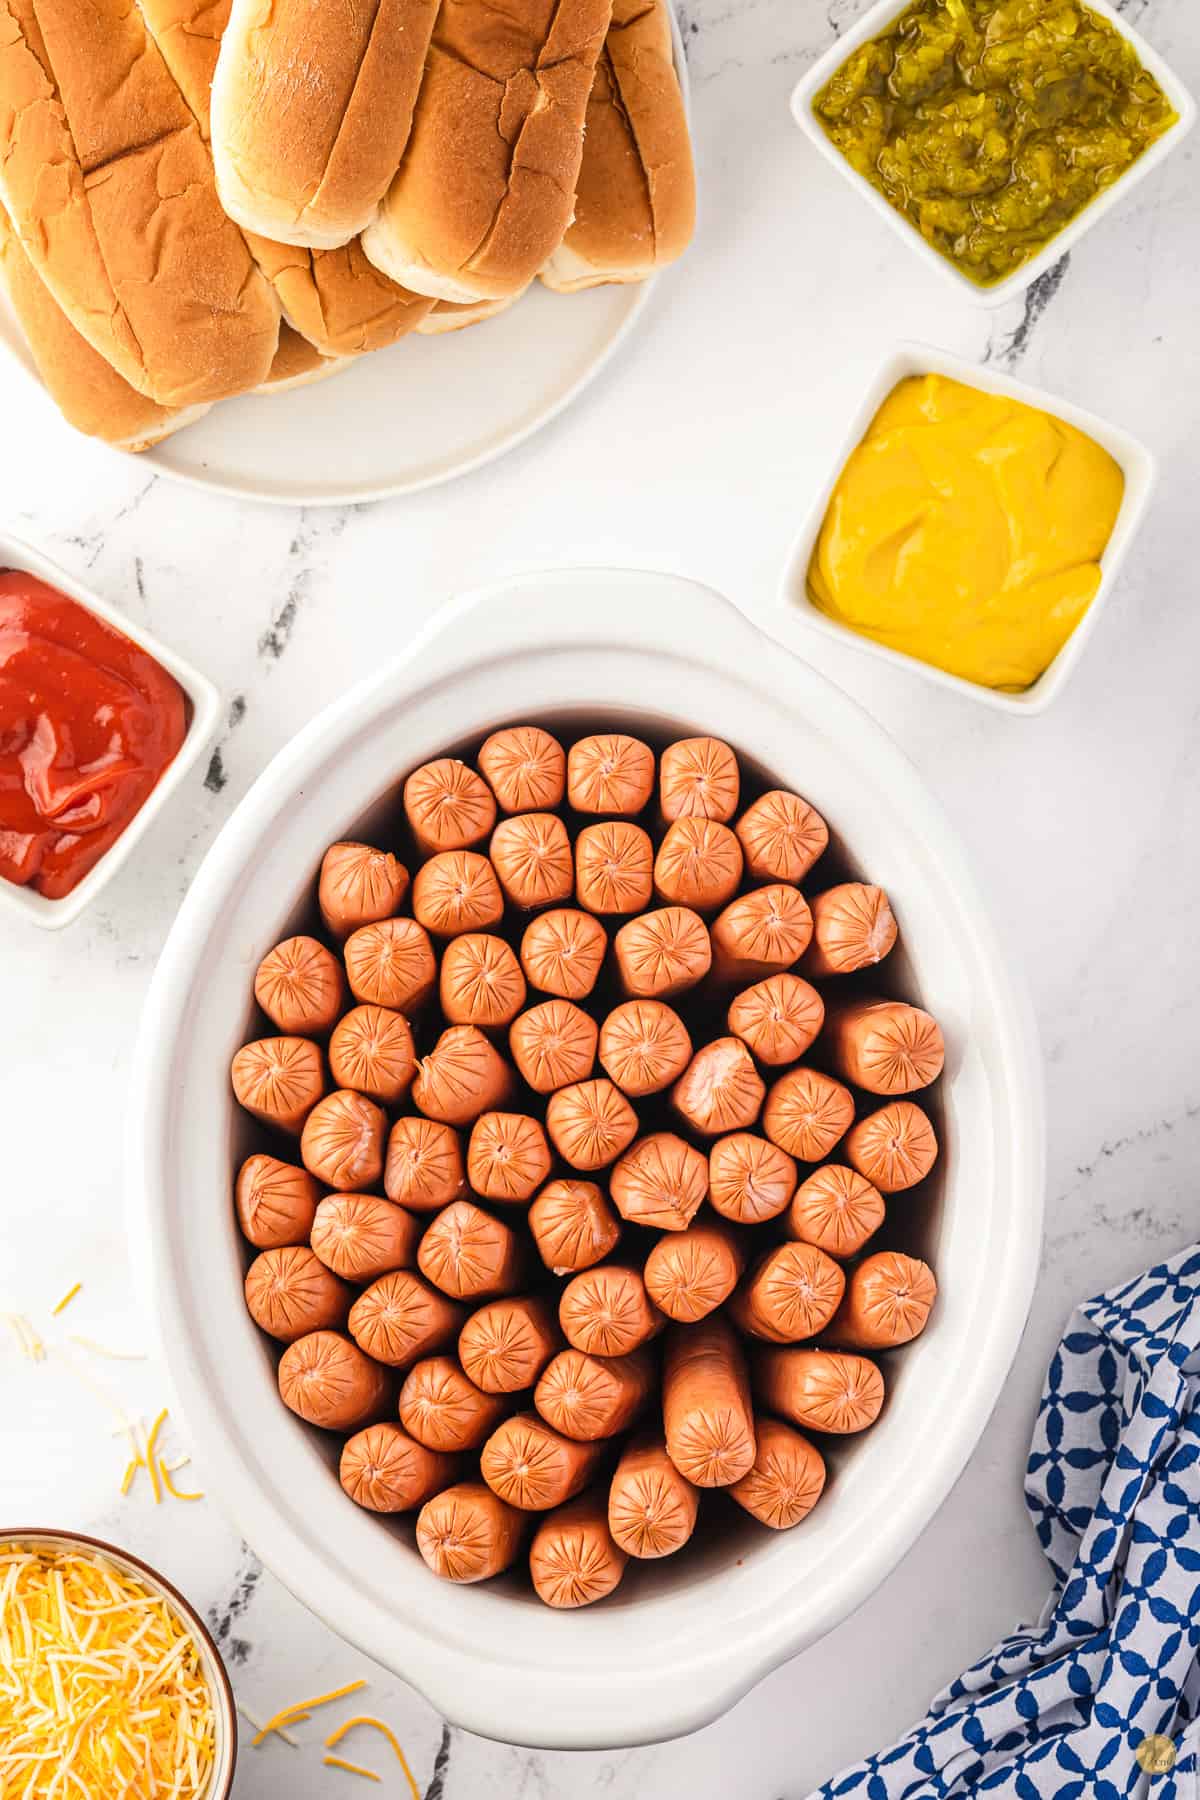 slow cooker full of hot dogs